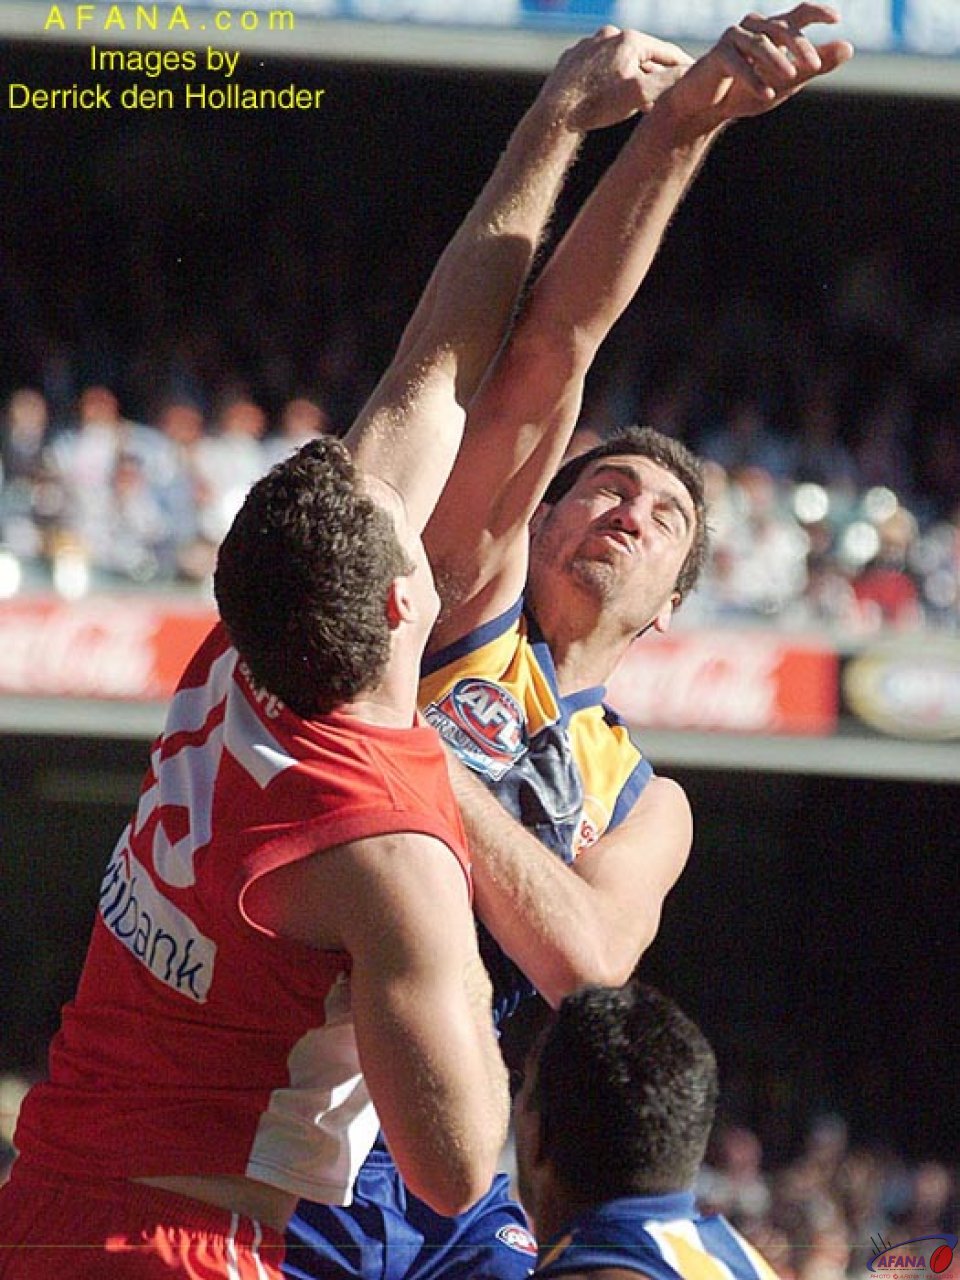 [b]The two giant ruckmen from both sides contest a boundary throw in[/b]